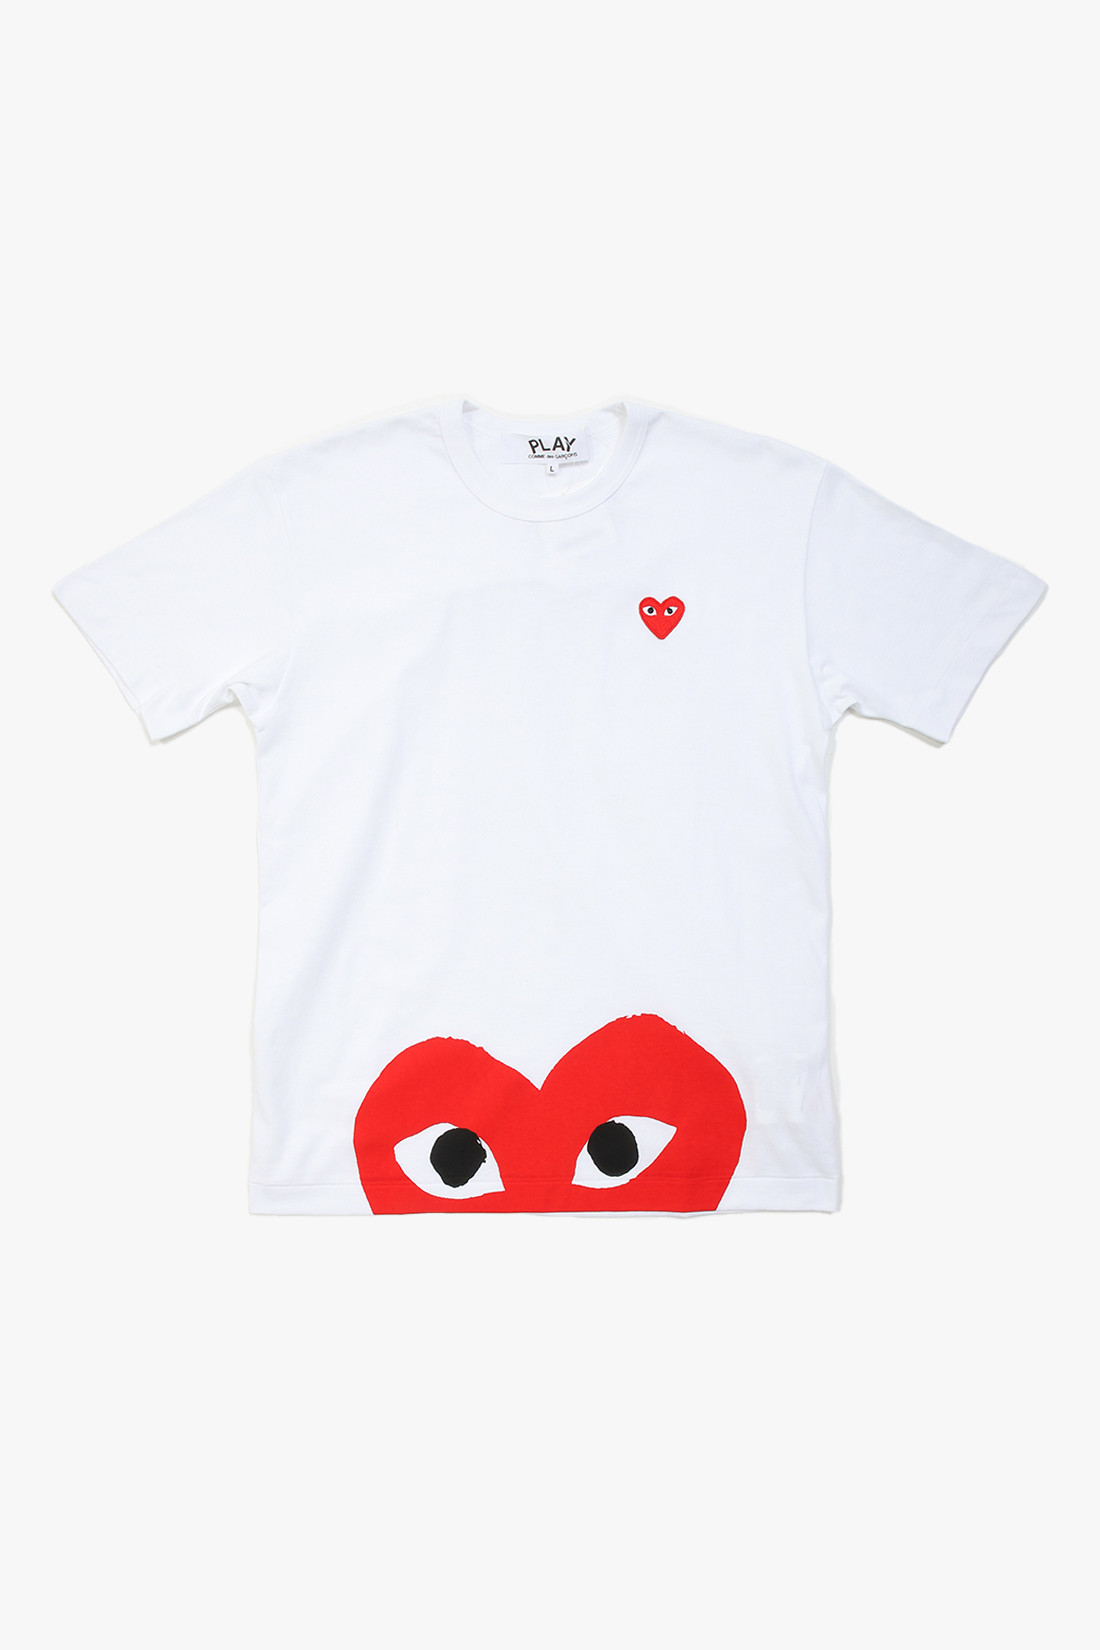 Play t-shirt red heart low White